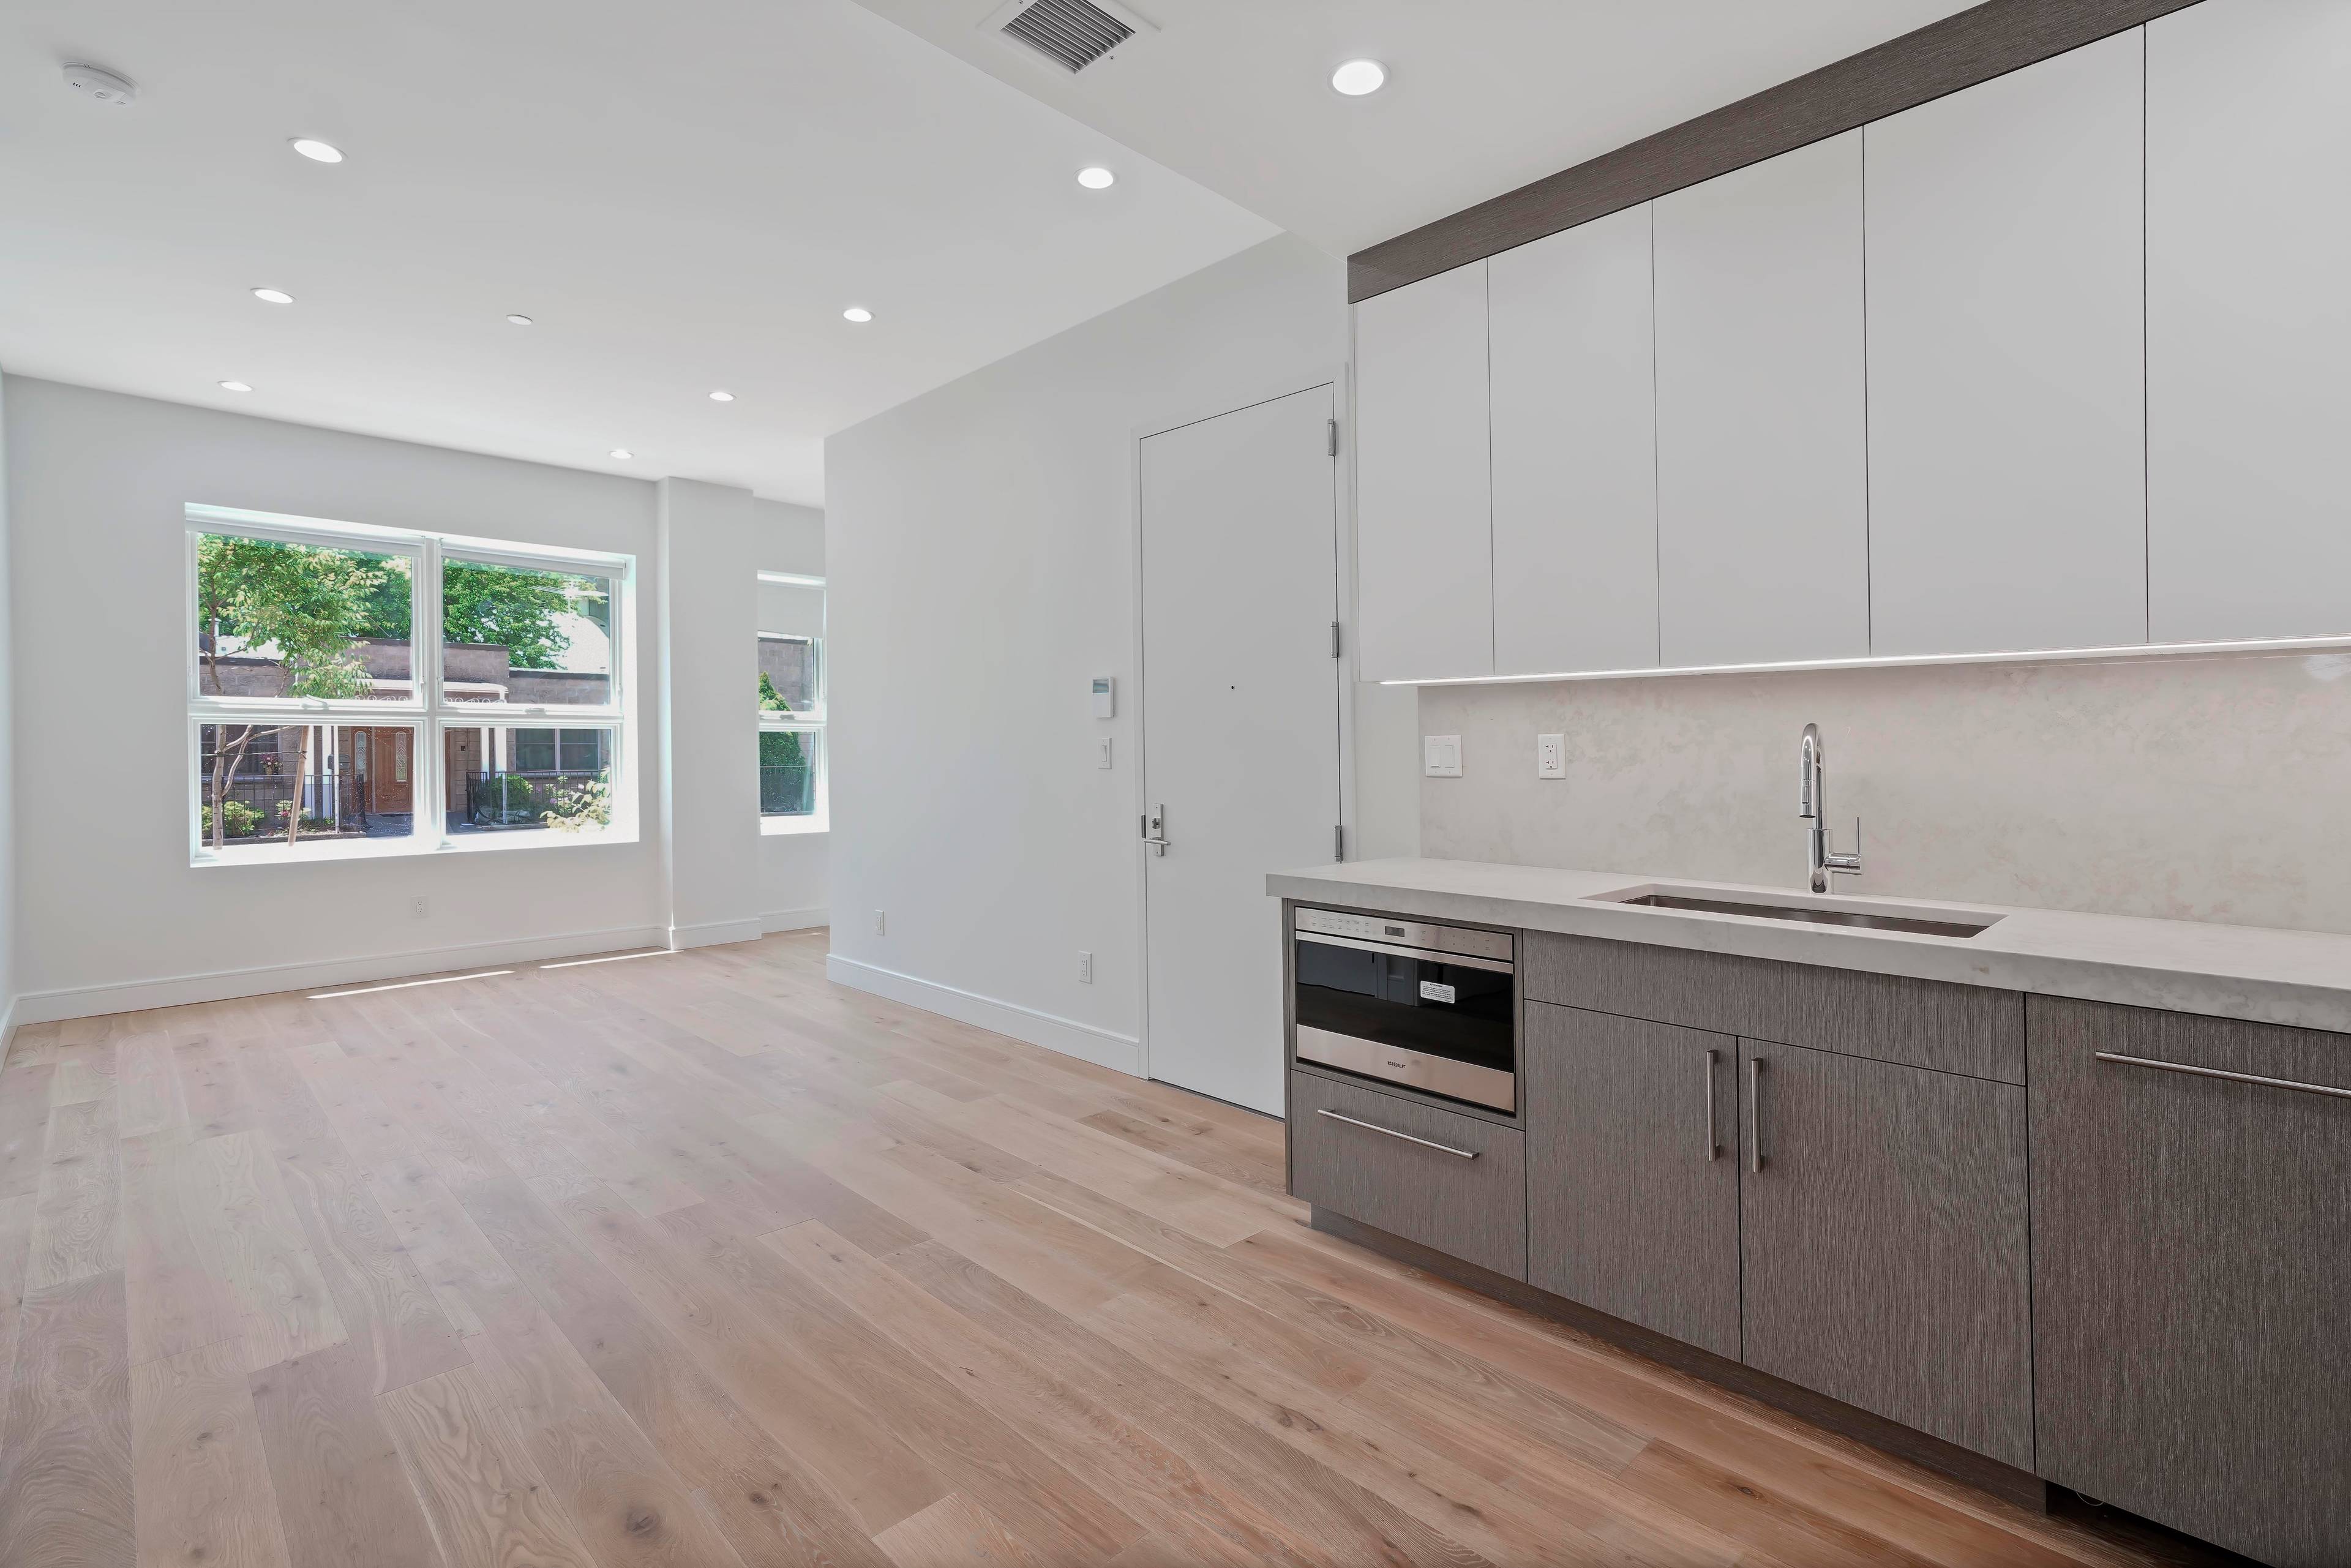 This modern, boutique 8 unit new development is located at 45 Garnet Street in Carroll Gardens is the epitome of elegant simplicity and privacy.